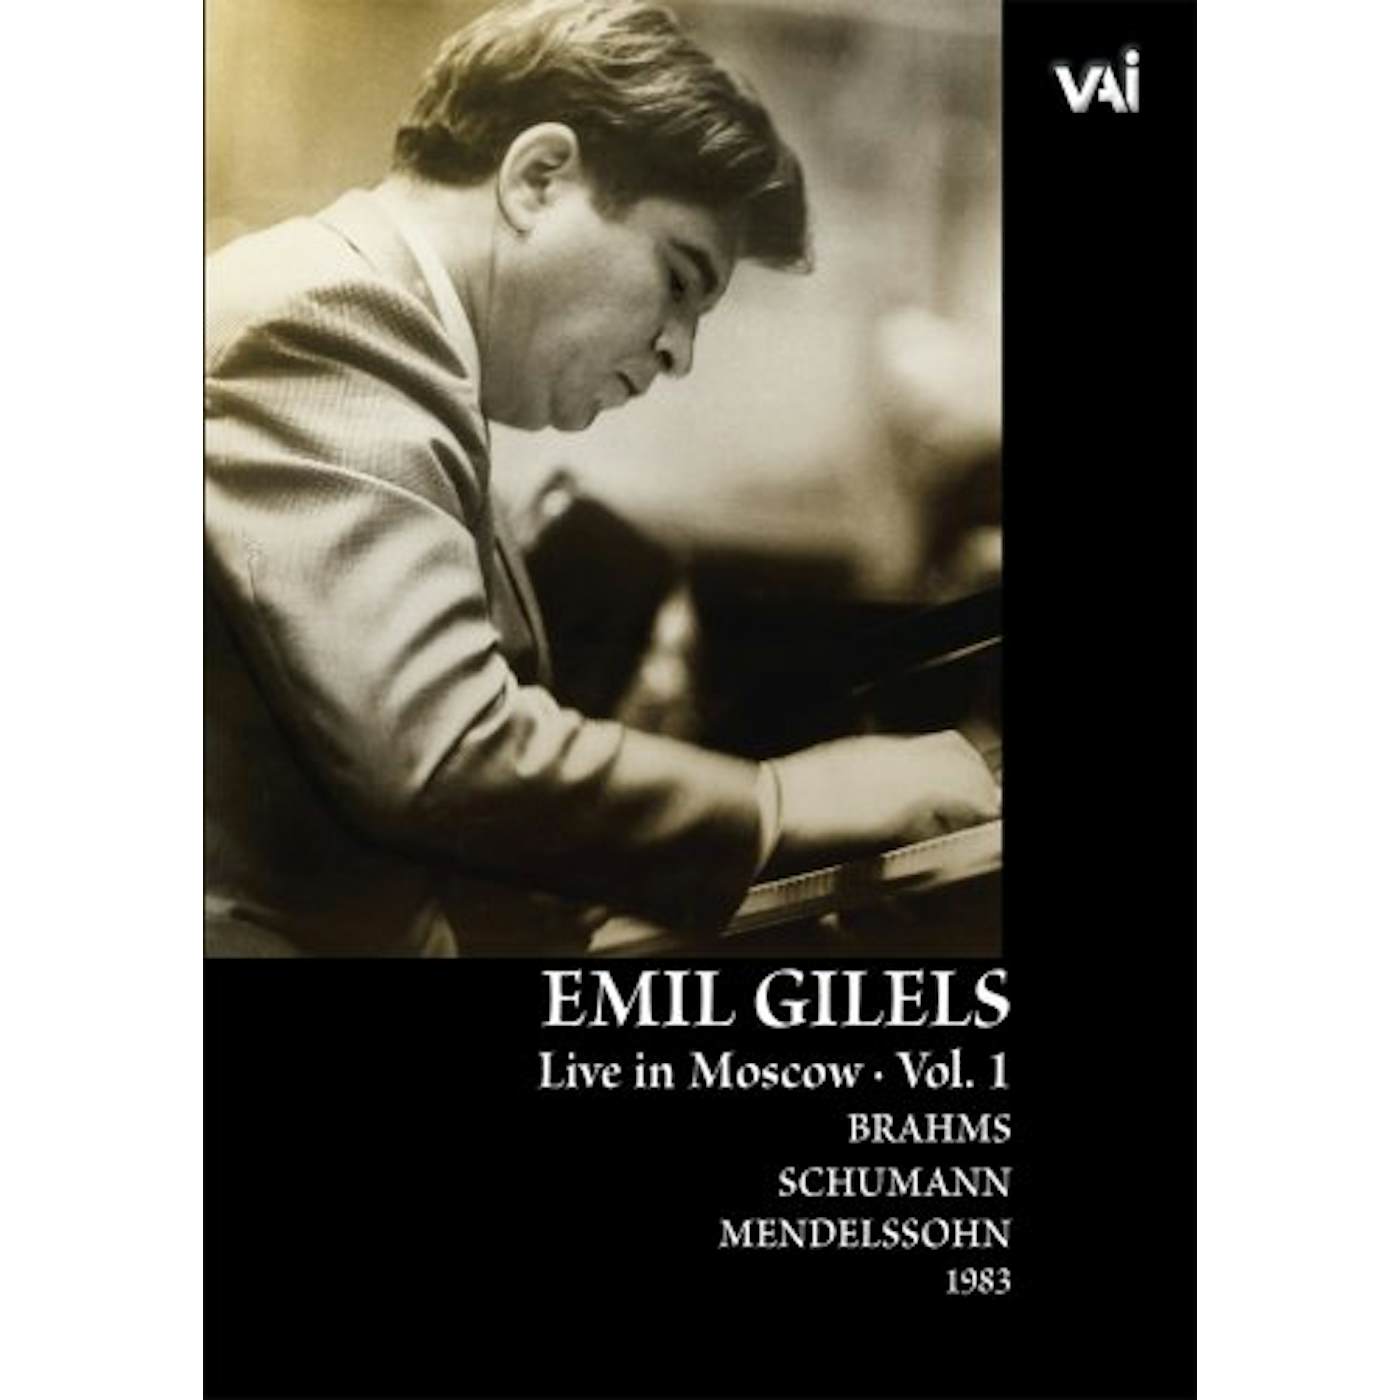 Emil Gilels RECITAL FROM GREAT HALL OF MOSCOW CONSERVATORY 1 DVD